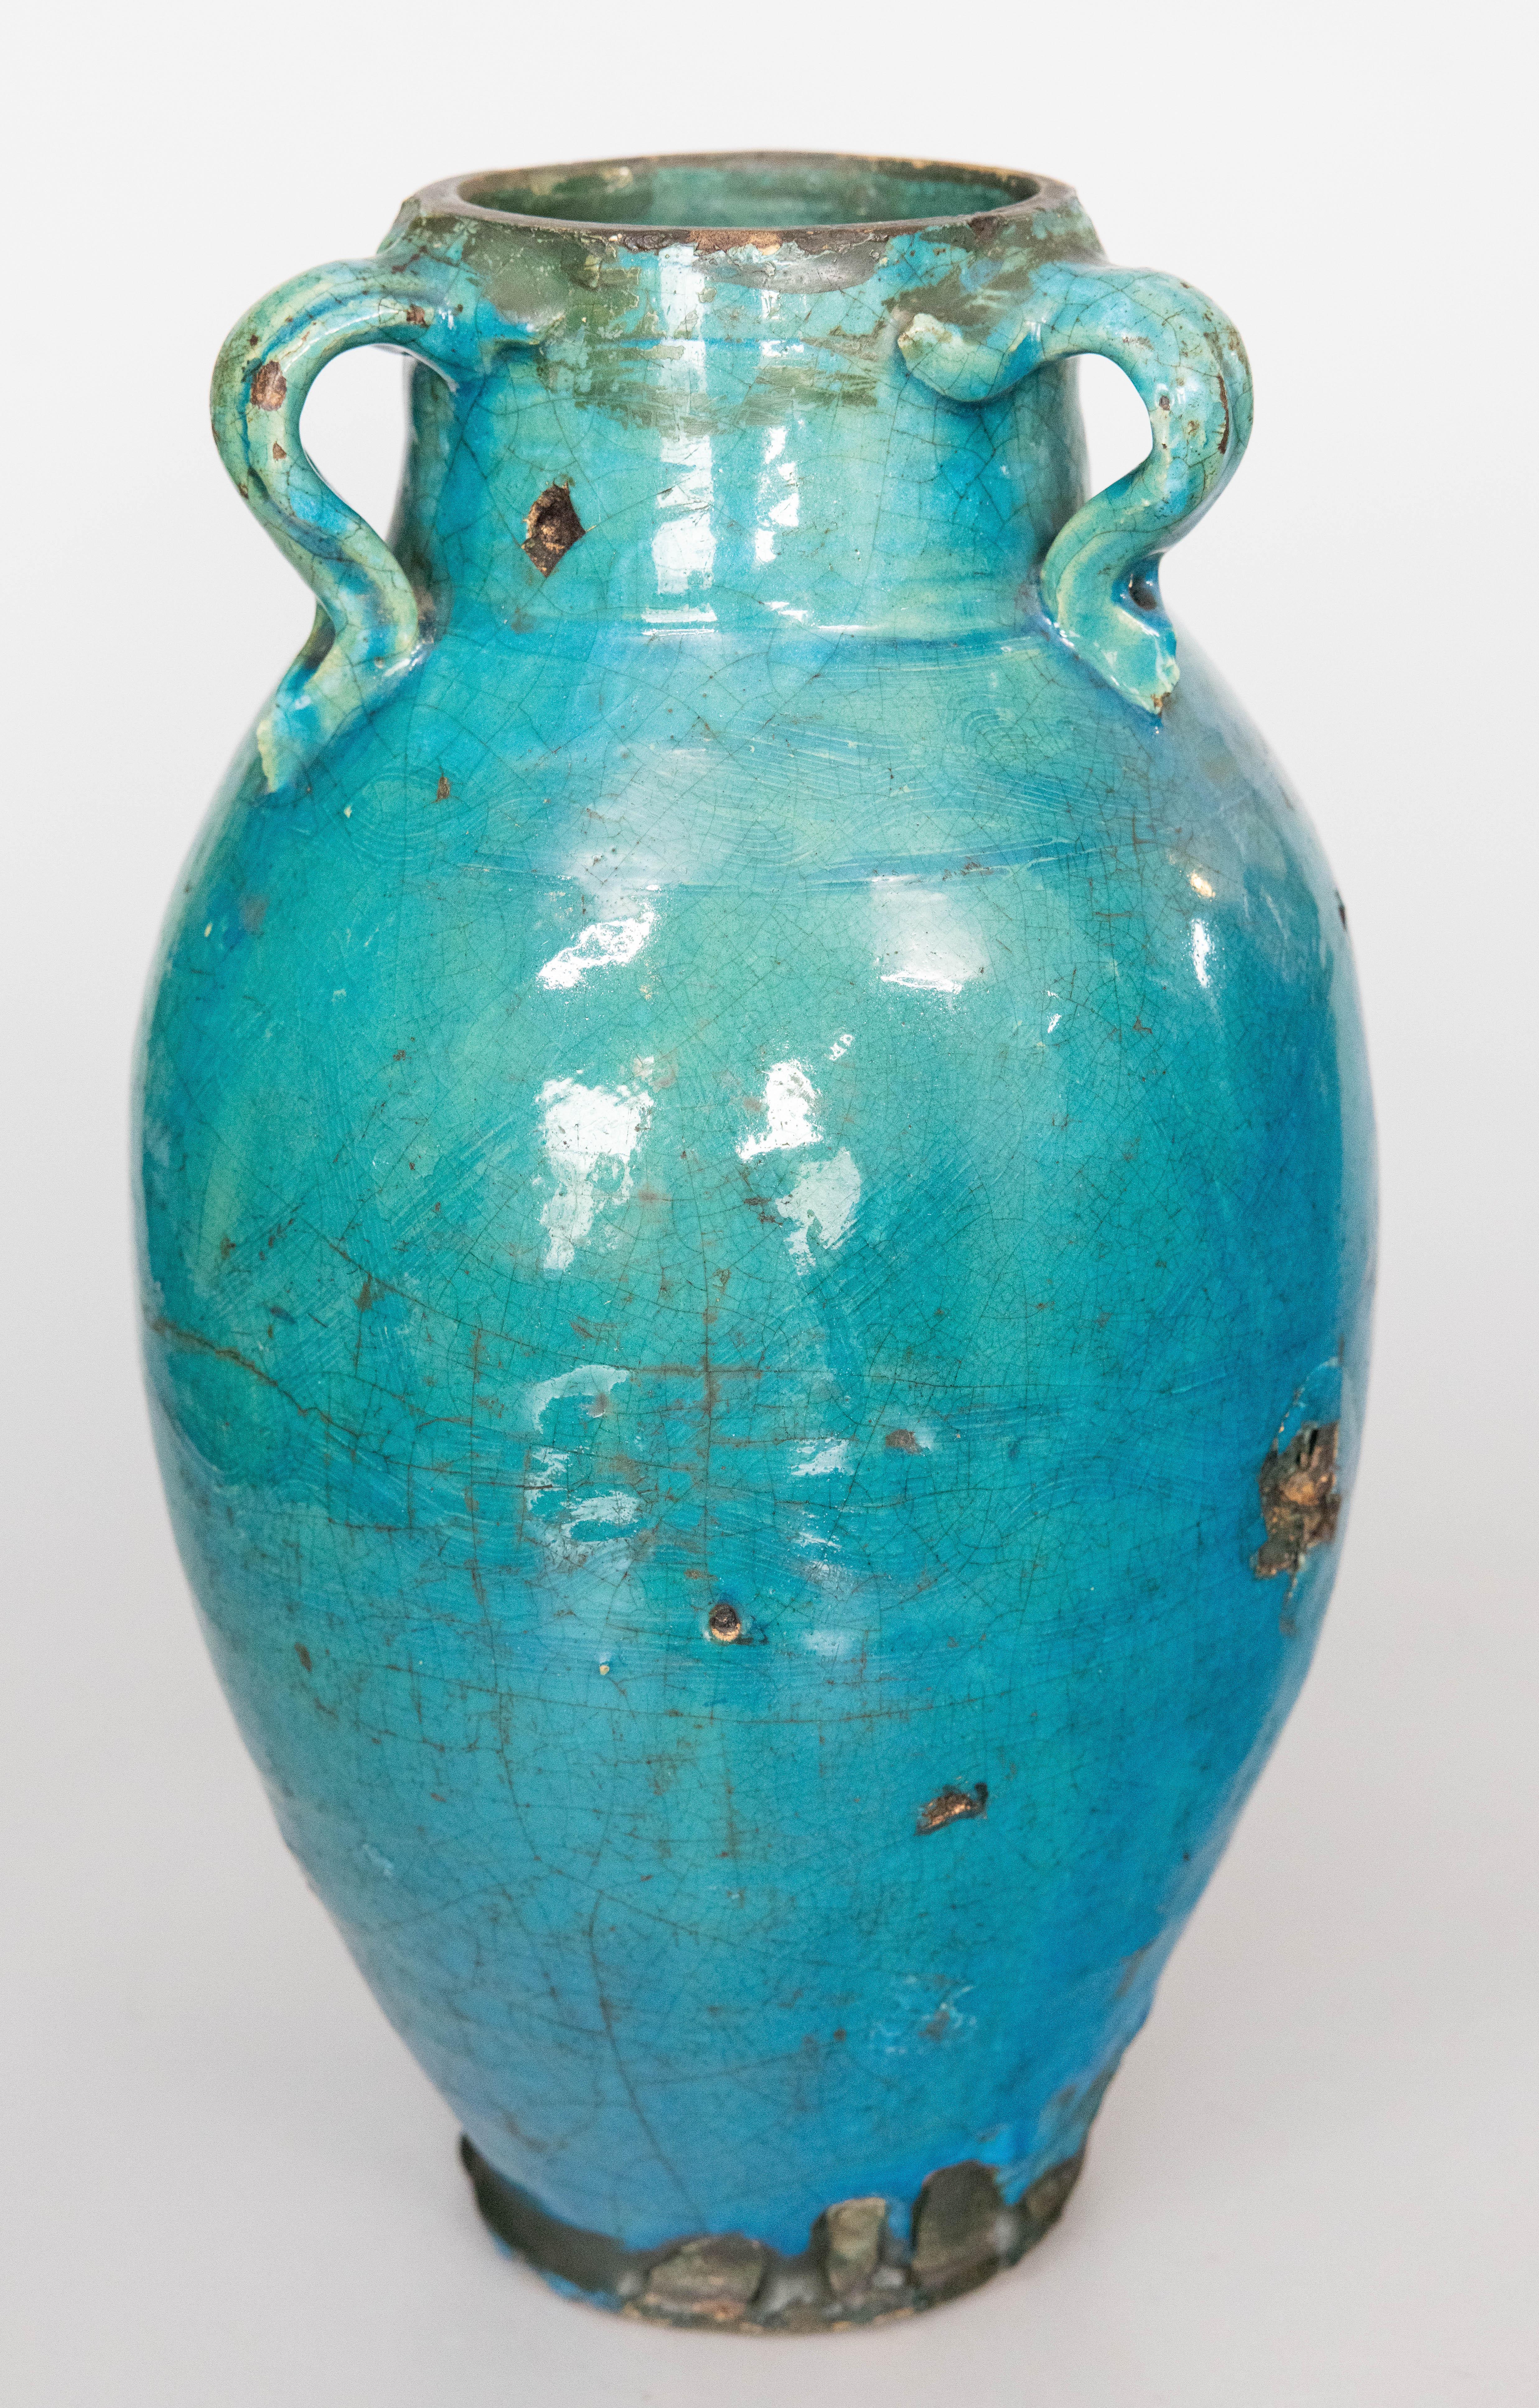 Large 19th Century French Turquoise Glazed Terracotta Vase Urn Olive Jar In Good Condition For Sale In Pearland, TX